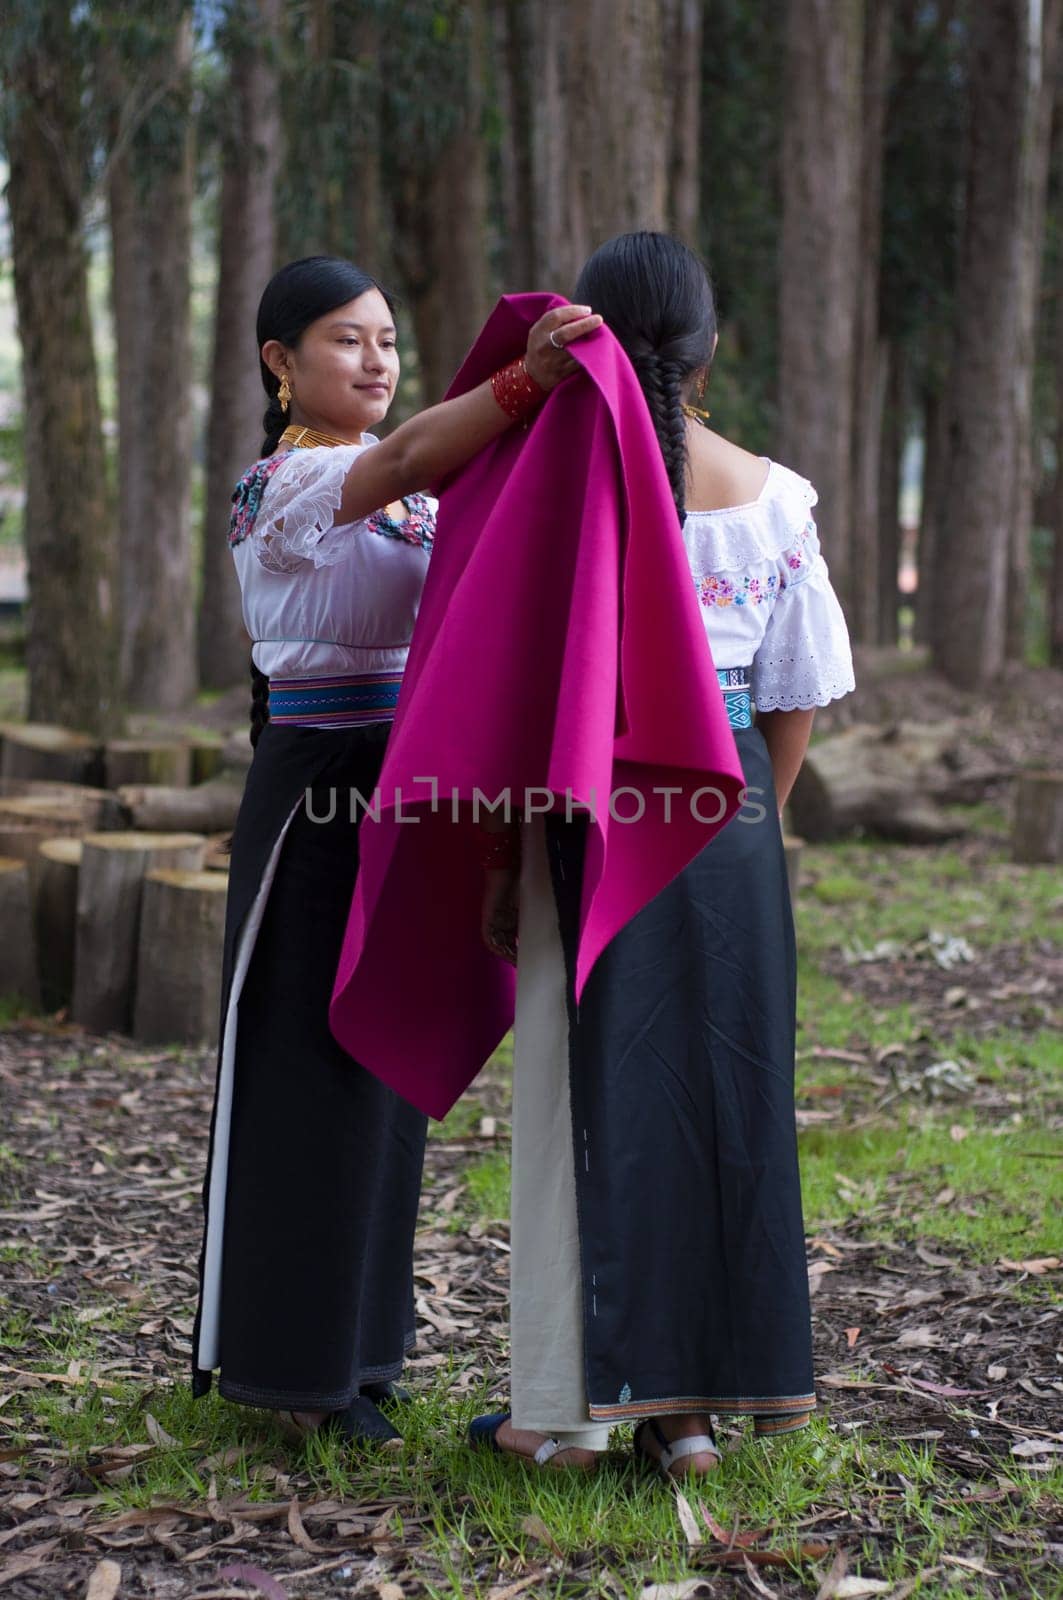 an indigenous girl tucking in a small indigenous girl in the forest of otavalo, ecuador. High quality photo